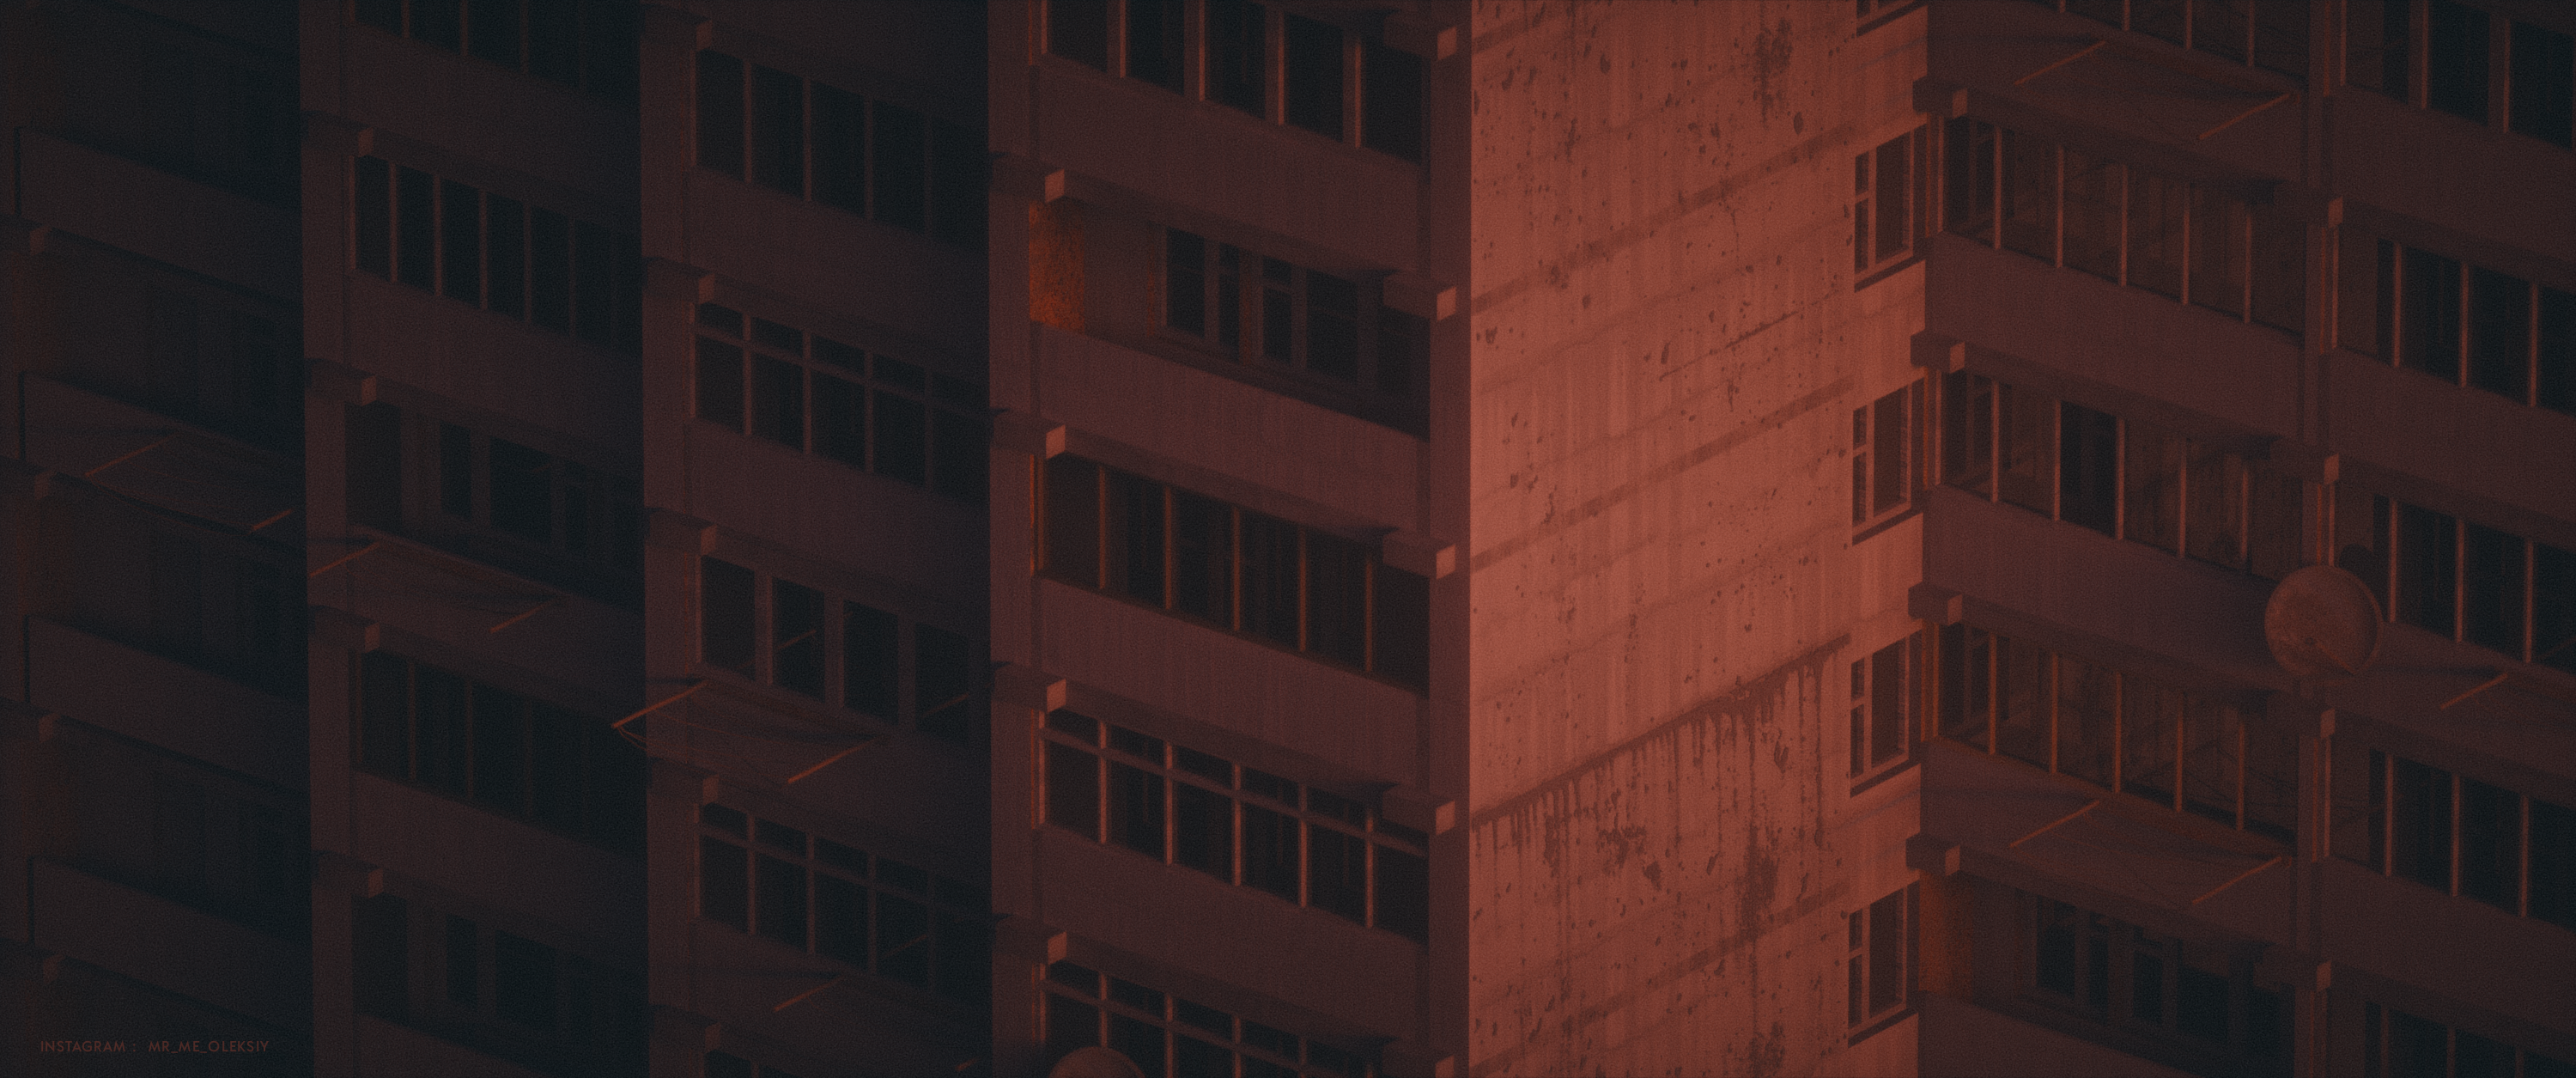 General 3000x1255 building architecture abstract USSR Brutalism block of flats sunset glow crimson